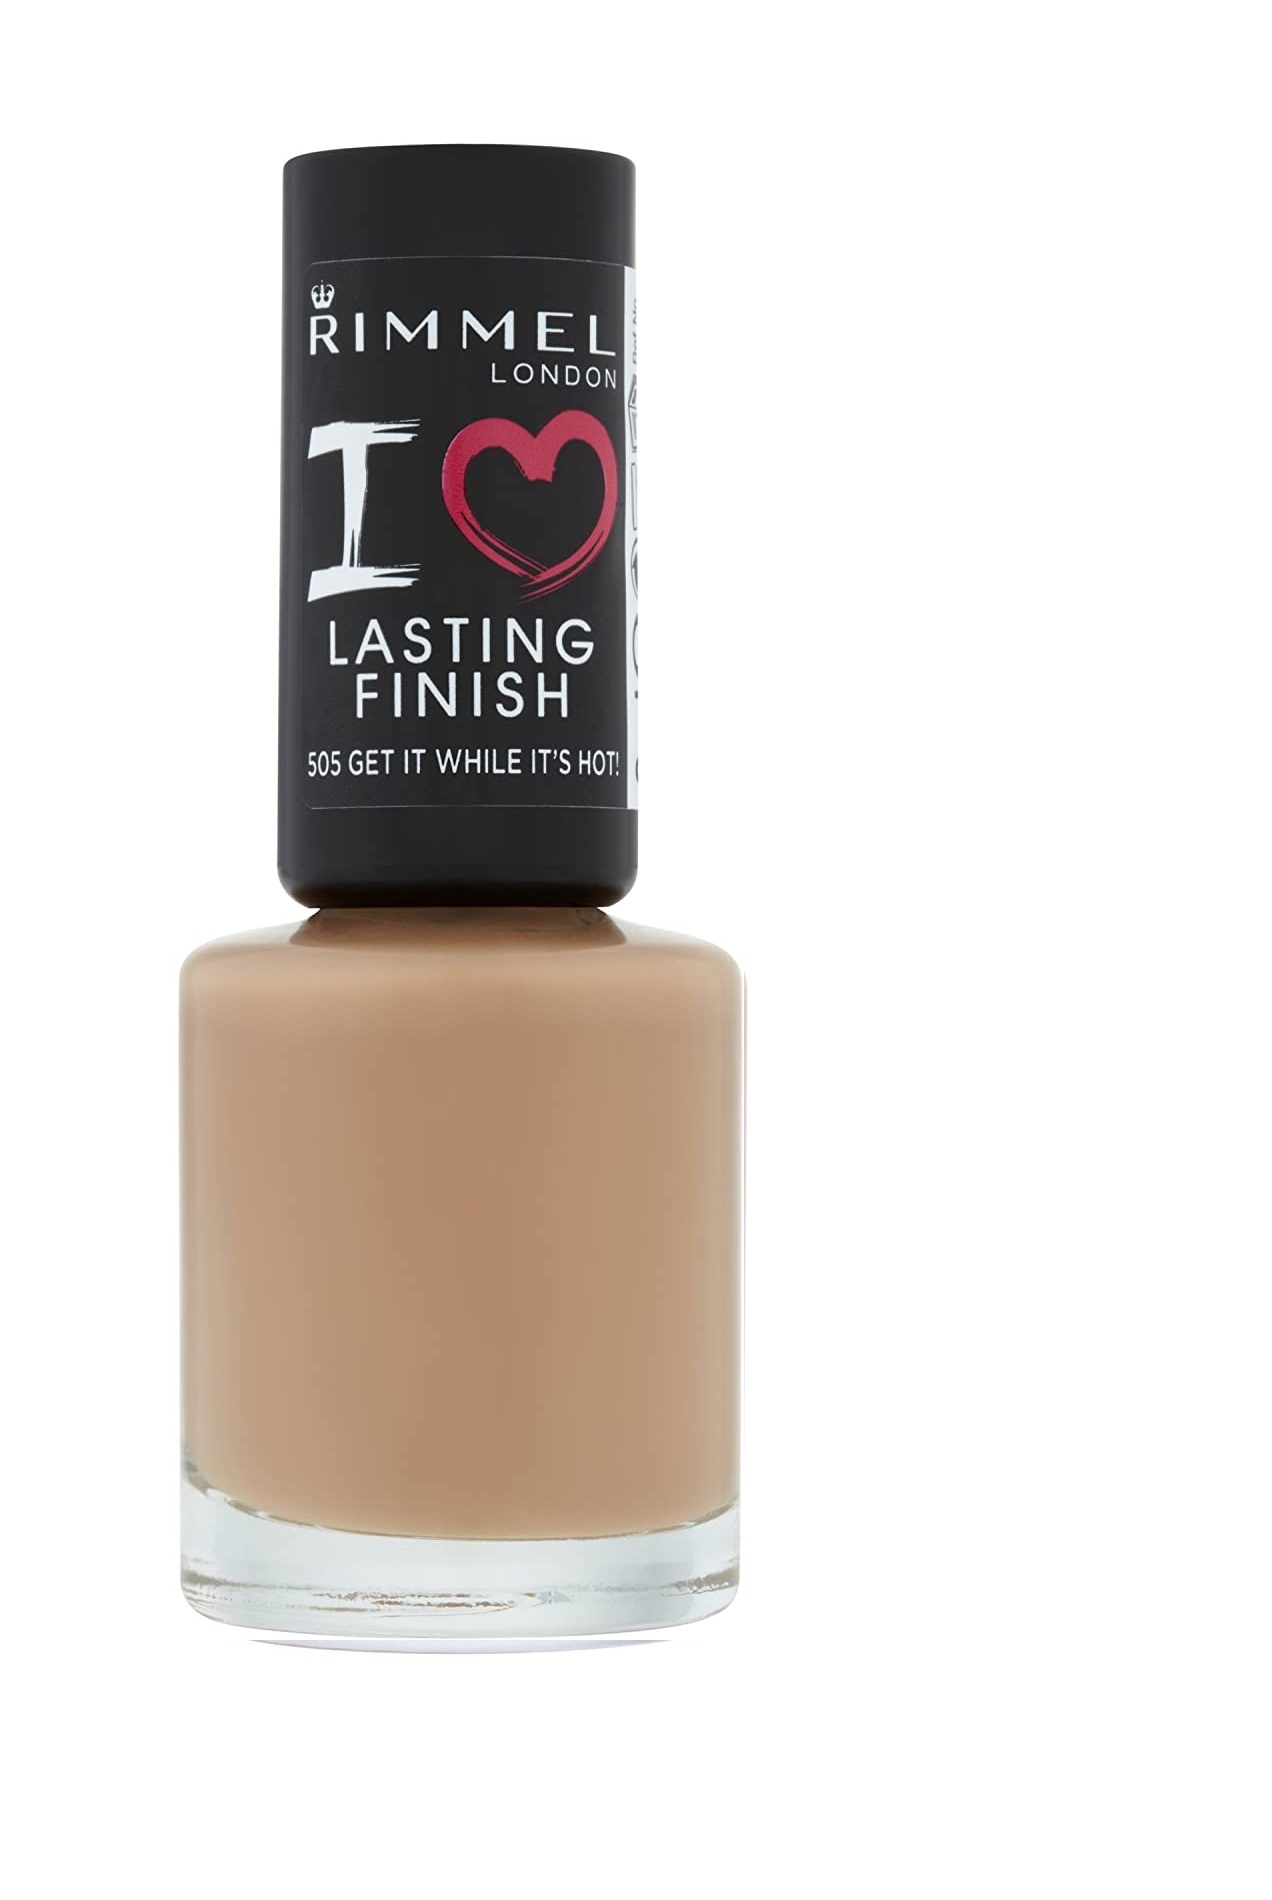 RIMMEL LONDON LASTING FINISH GET IT WHILE ITS HOT 505 8ML